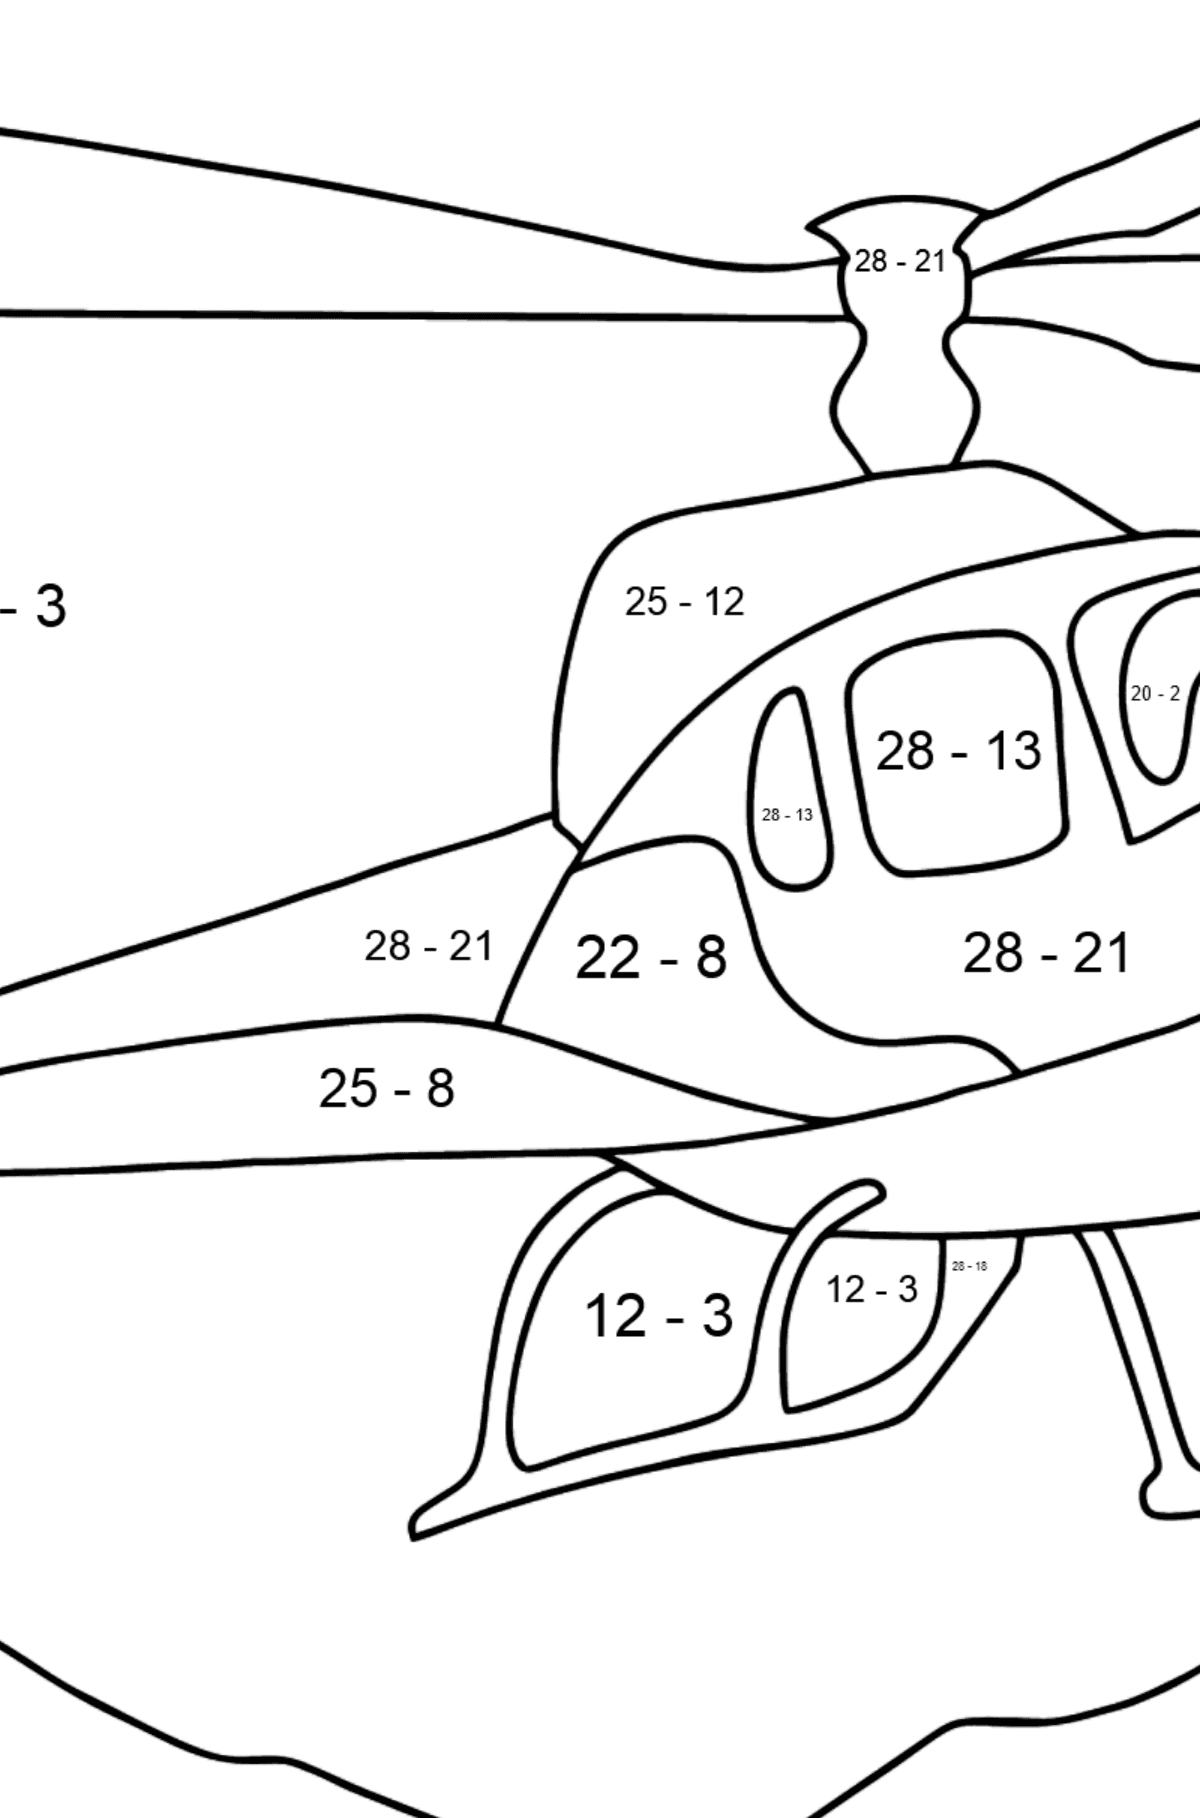 Coloring Page - A City Helicopter - Math Coloring - Subtraction for Kids